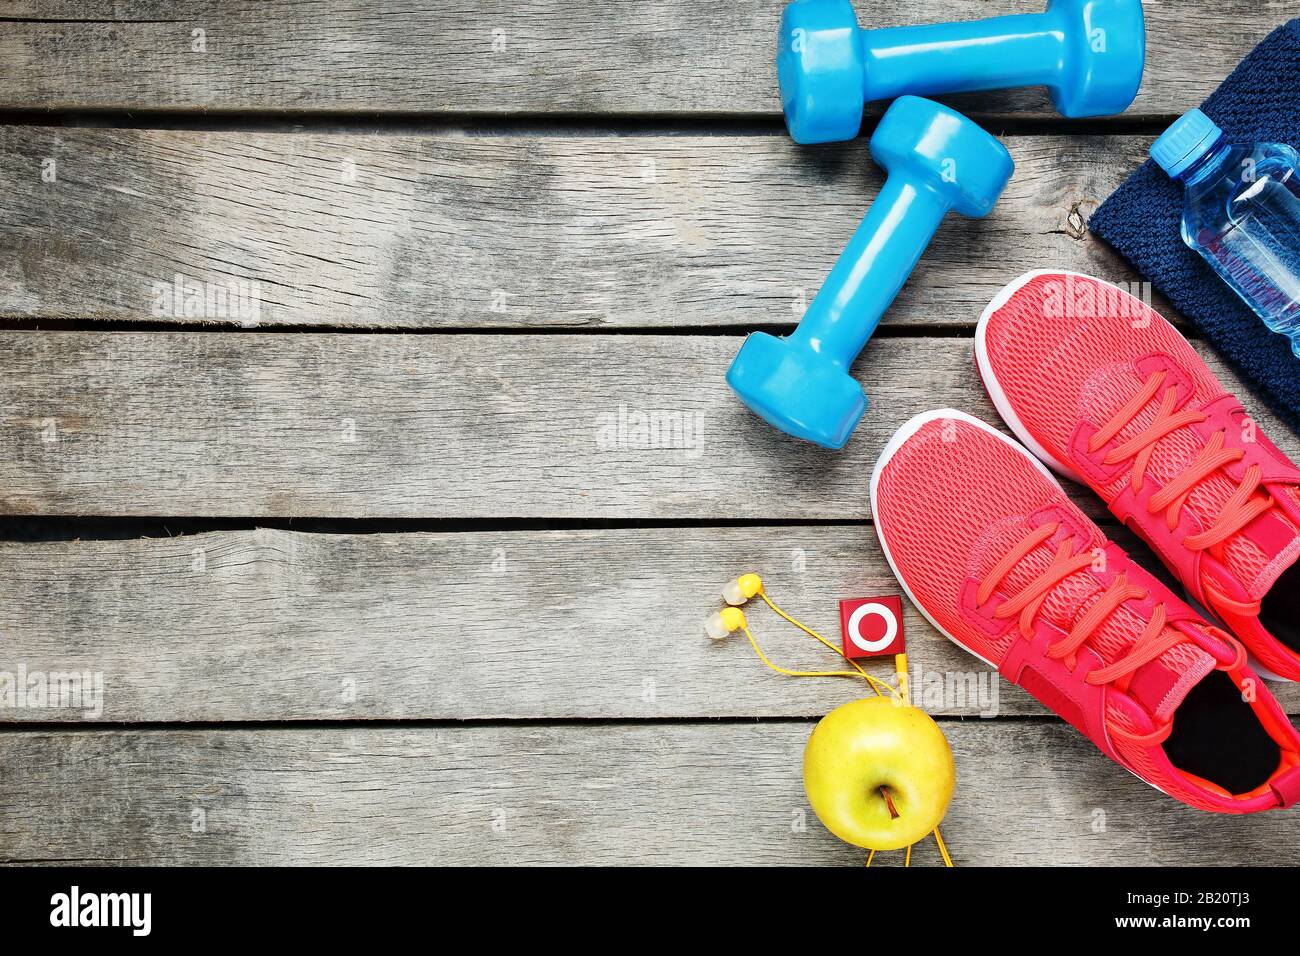 https://c8.alamy.com/comp/2B20TJ3/set-of-sports-accessories-for-fitness-concept-with-exercise-equipment-on-gray-background-background-view-from-above-2B20TJ3.jpg